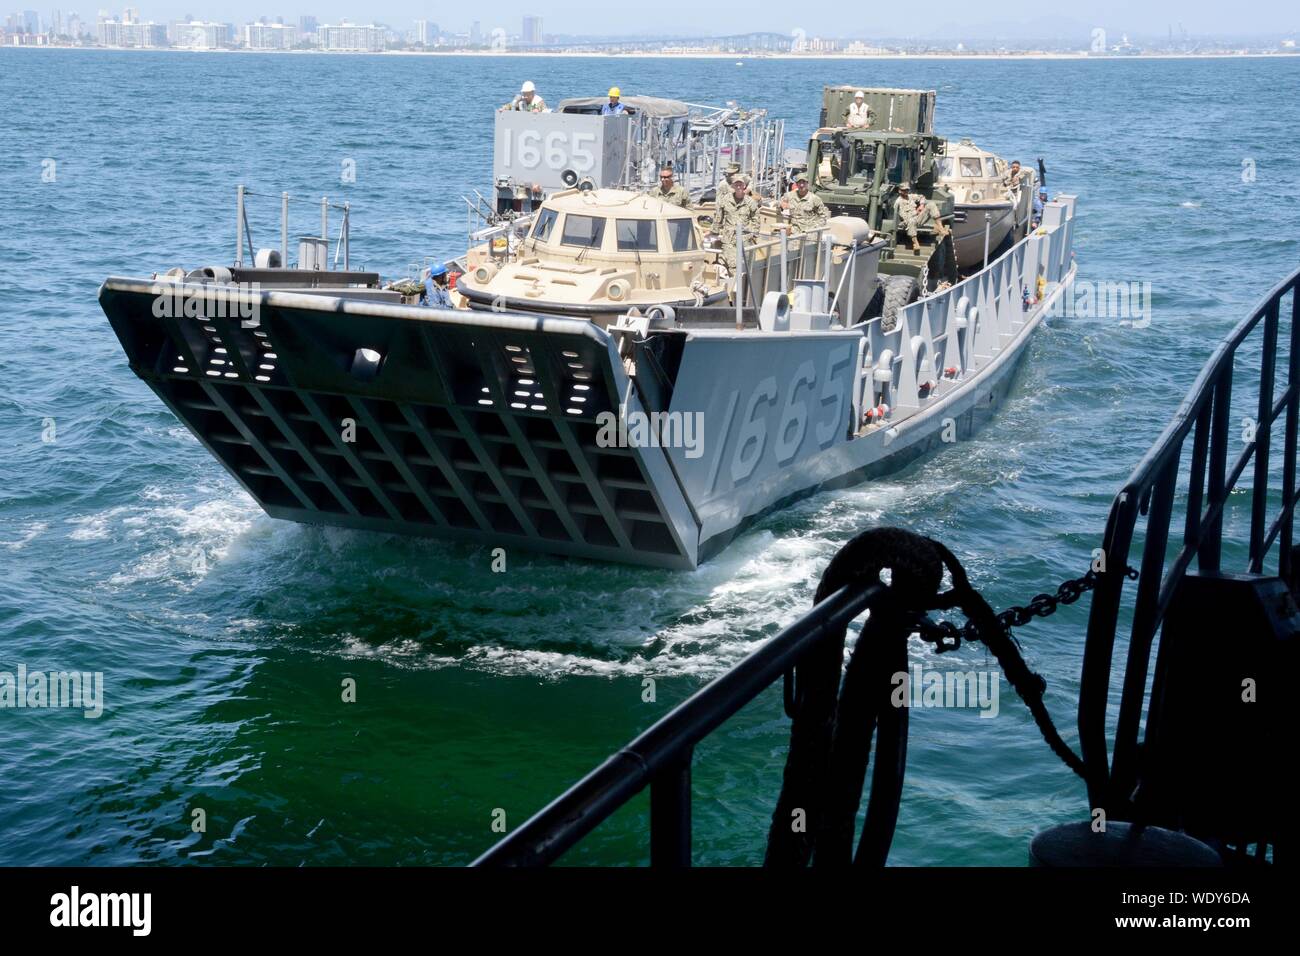 190823-N-XN177-0337 PACIFIC OCEAN (Aug. 23, 2019) – Landing Craft, Utility (LCU) 1665, attached to Assault Craft Unit (ACU) 1, prepares to enter the well deck of the dock landing ship USS Comstock (LSD 45). Comstock is currently underway conducting routine operations. This year USS Comstock will participate in the U.S. Navy Fleet Weeks in Los Angeles and San Francisco. (U.S. Navy Photo by Mass Communication Specialist 1st Class Peter Burghart/Released) Stock Photo